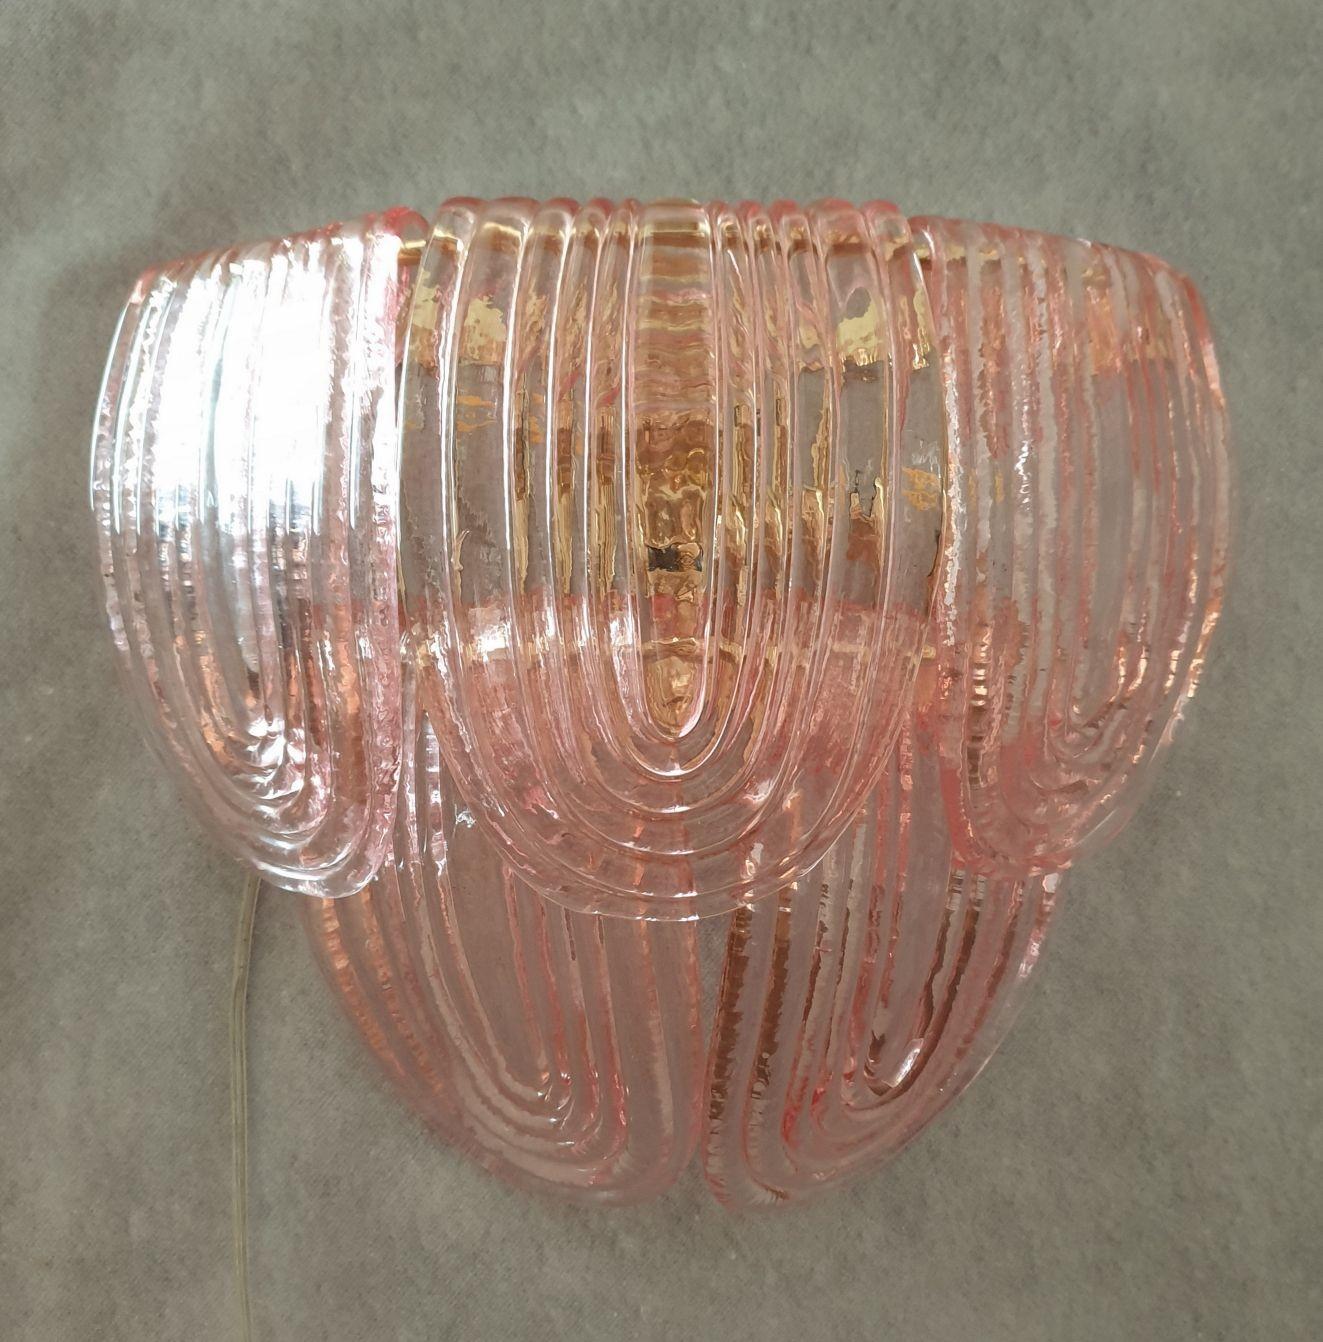 Mid-Century Modern pair of Murano glass sconces, attributed to Mazzega, Italy, 1980s.
The Italian sconces have a neoclassical style, and are very elegant.
The pair of sconces is made of translucent light pink Murano glass and a gold plated